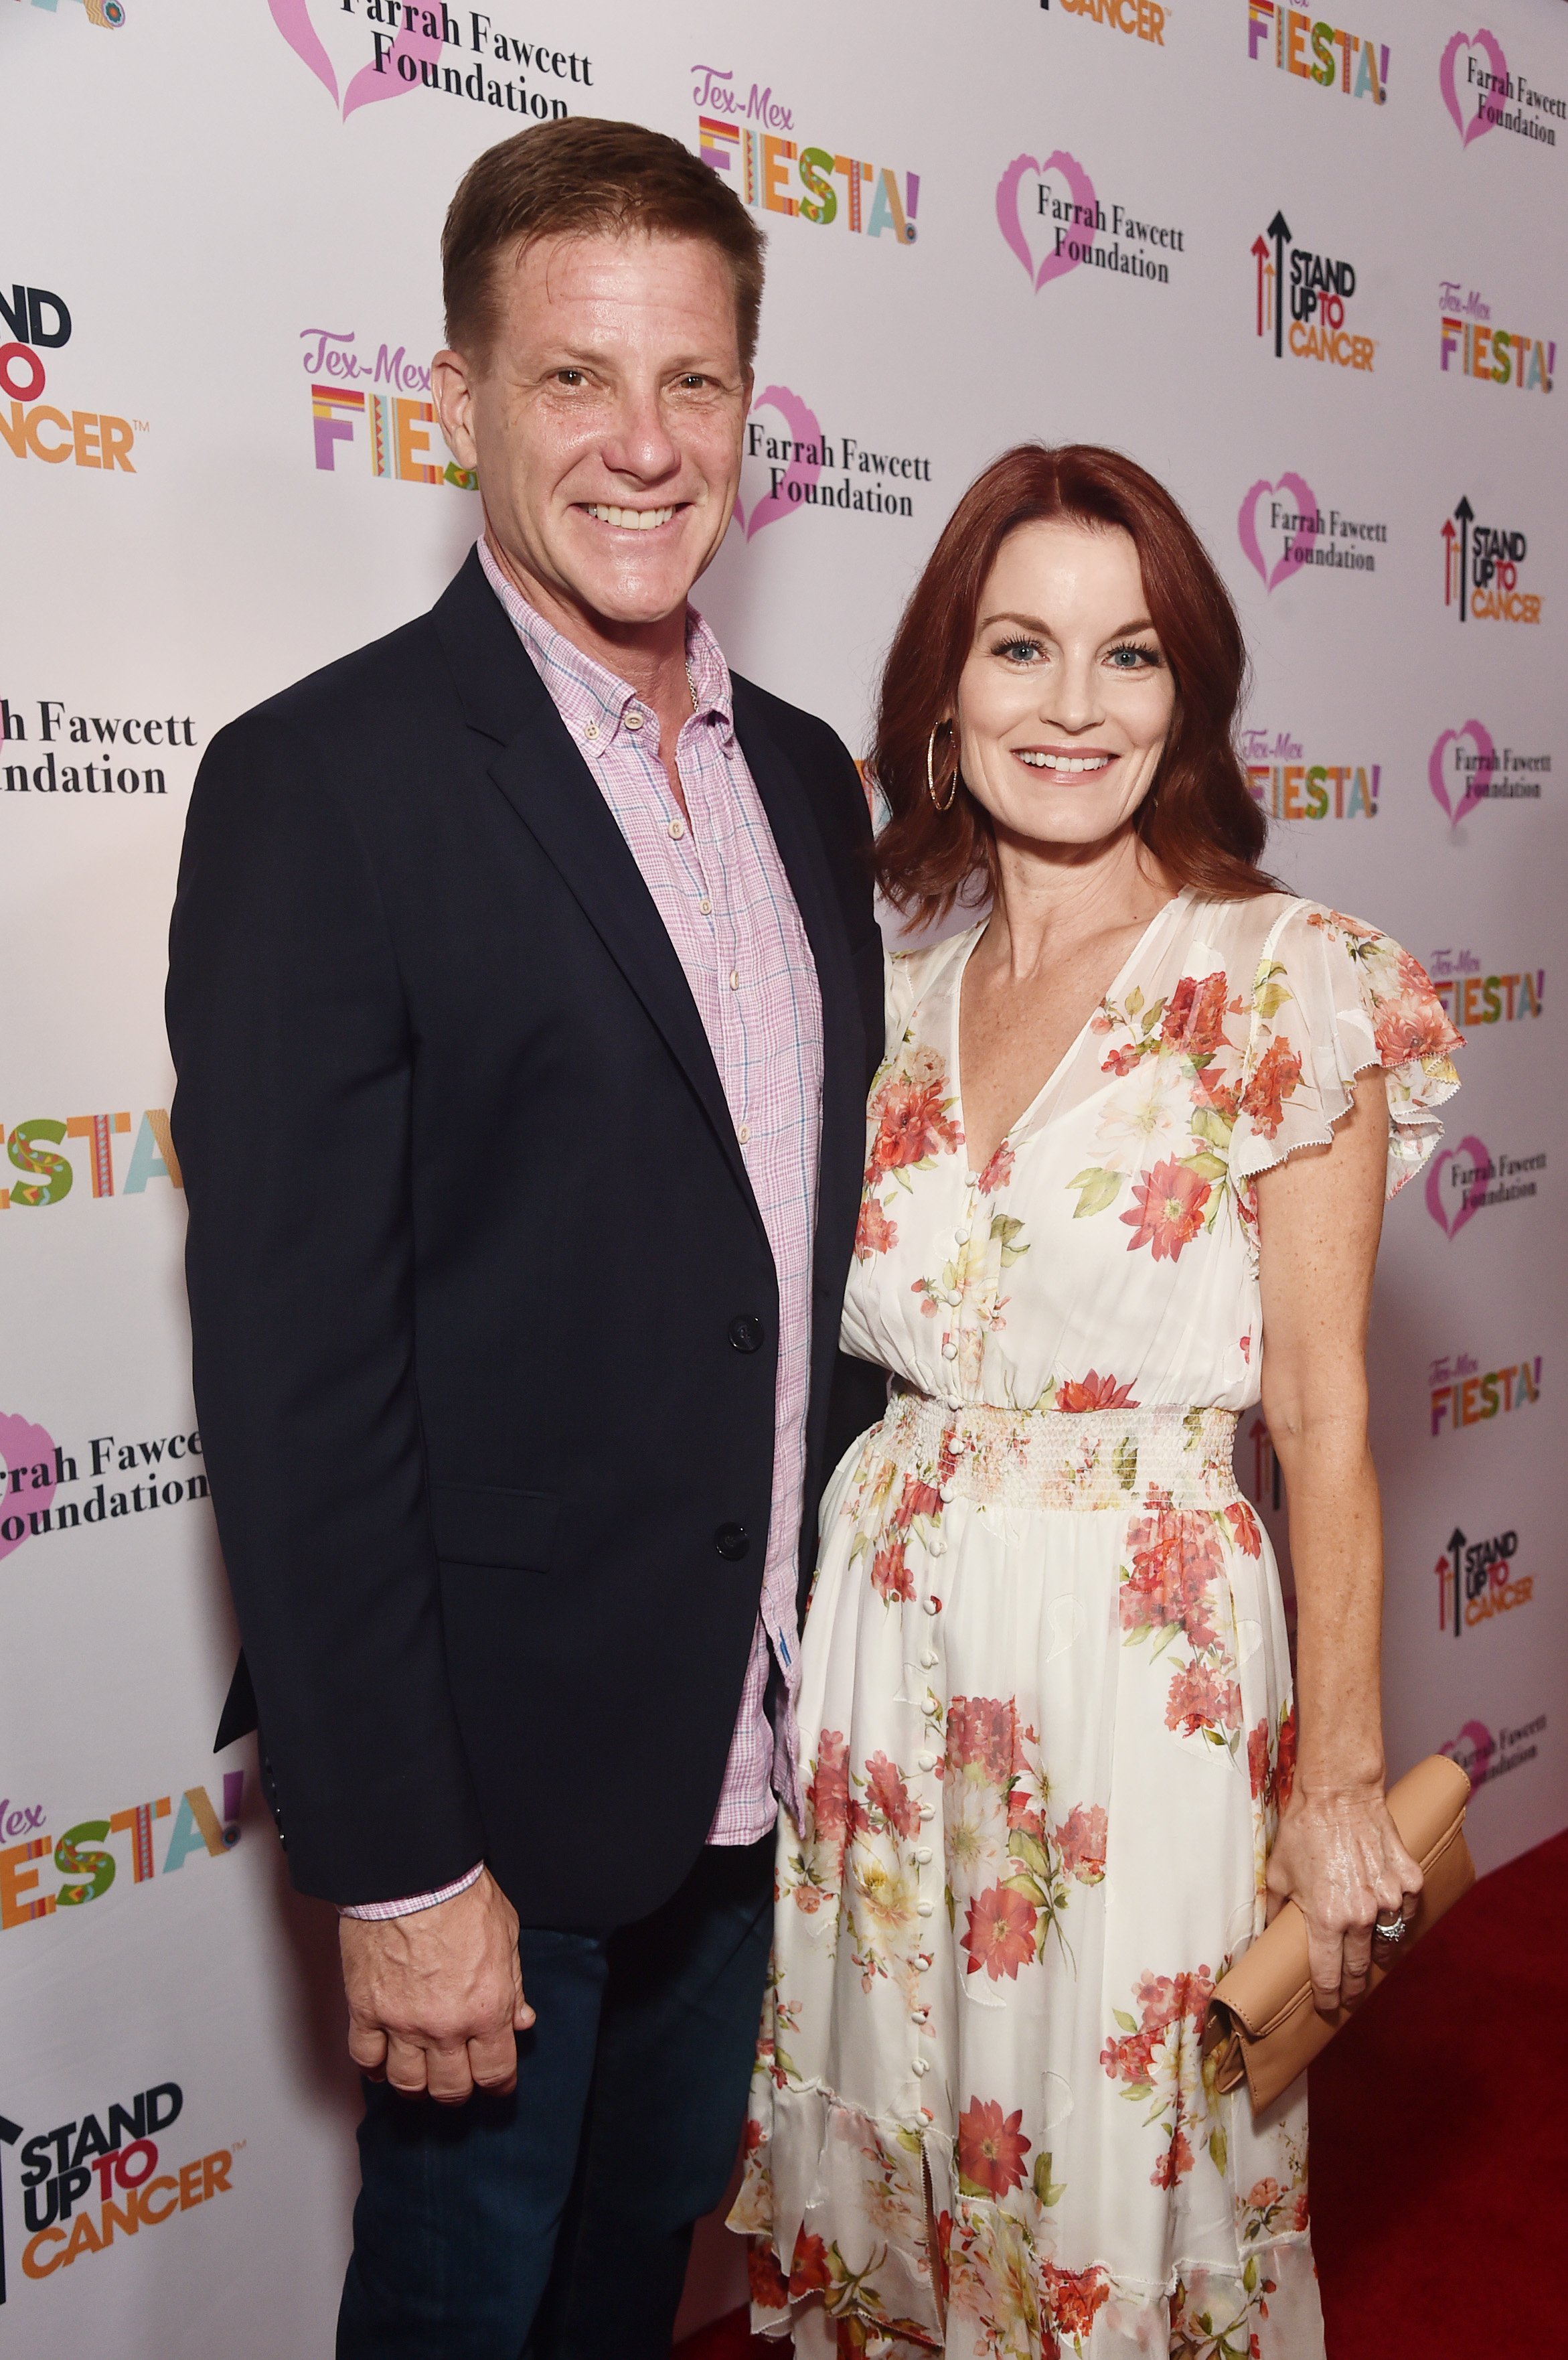 Doug Savant (L) and Laura Leighton attend the Farrah Fawcett Foundation's Tex-Mex Fiesta on September 06, 2019, in Los Angeles, California. | Source: Getty Images.